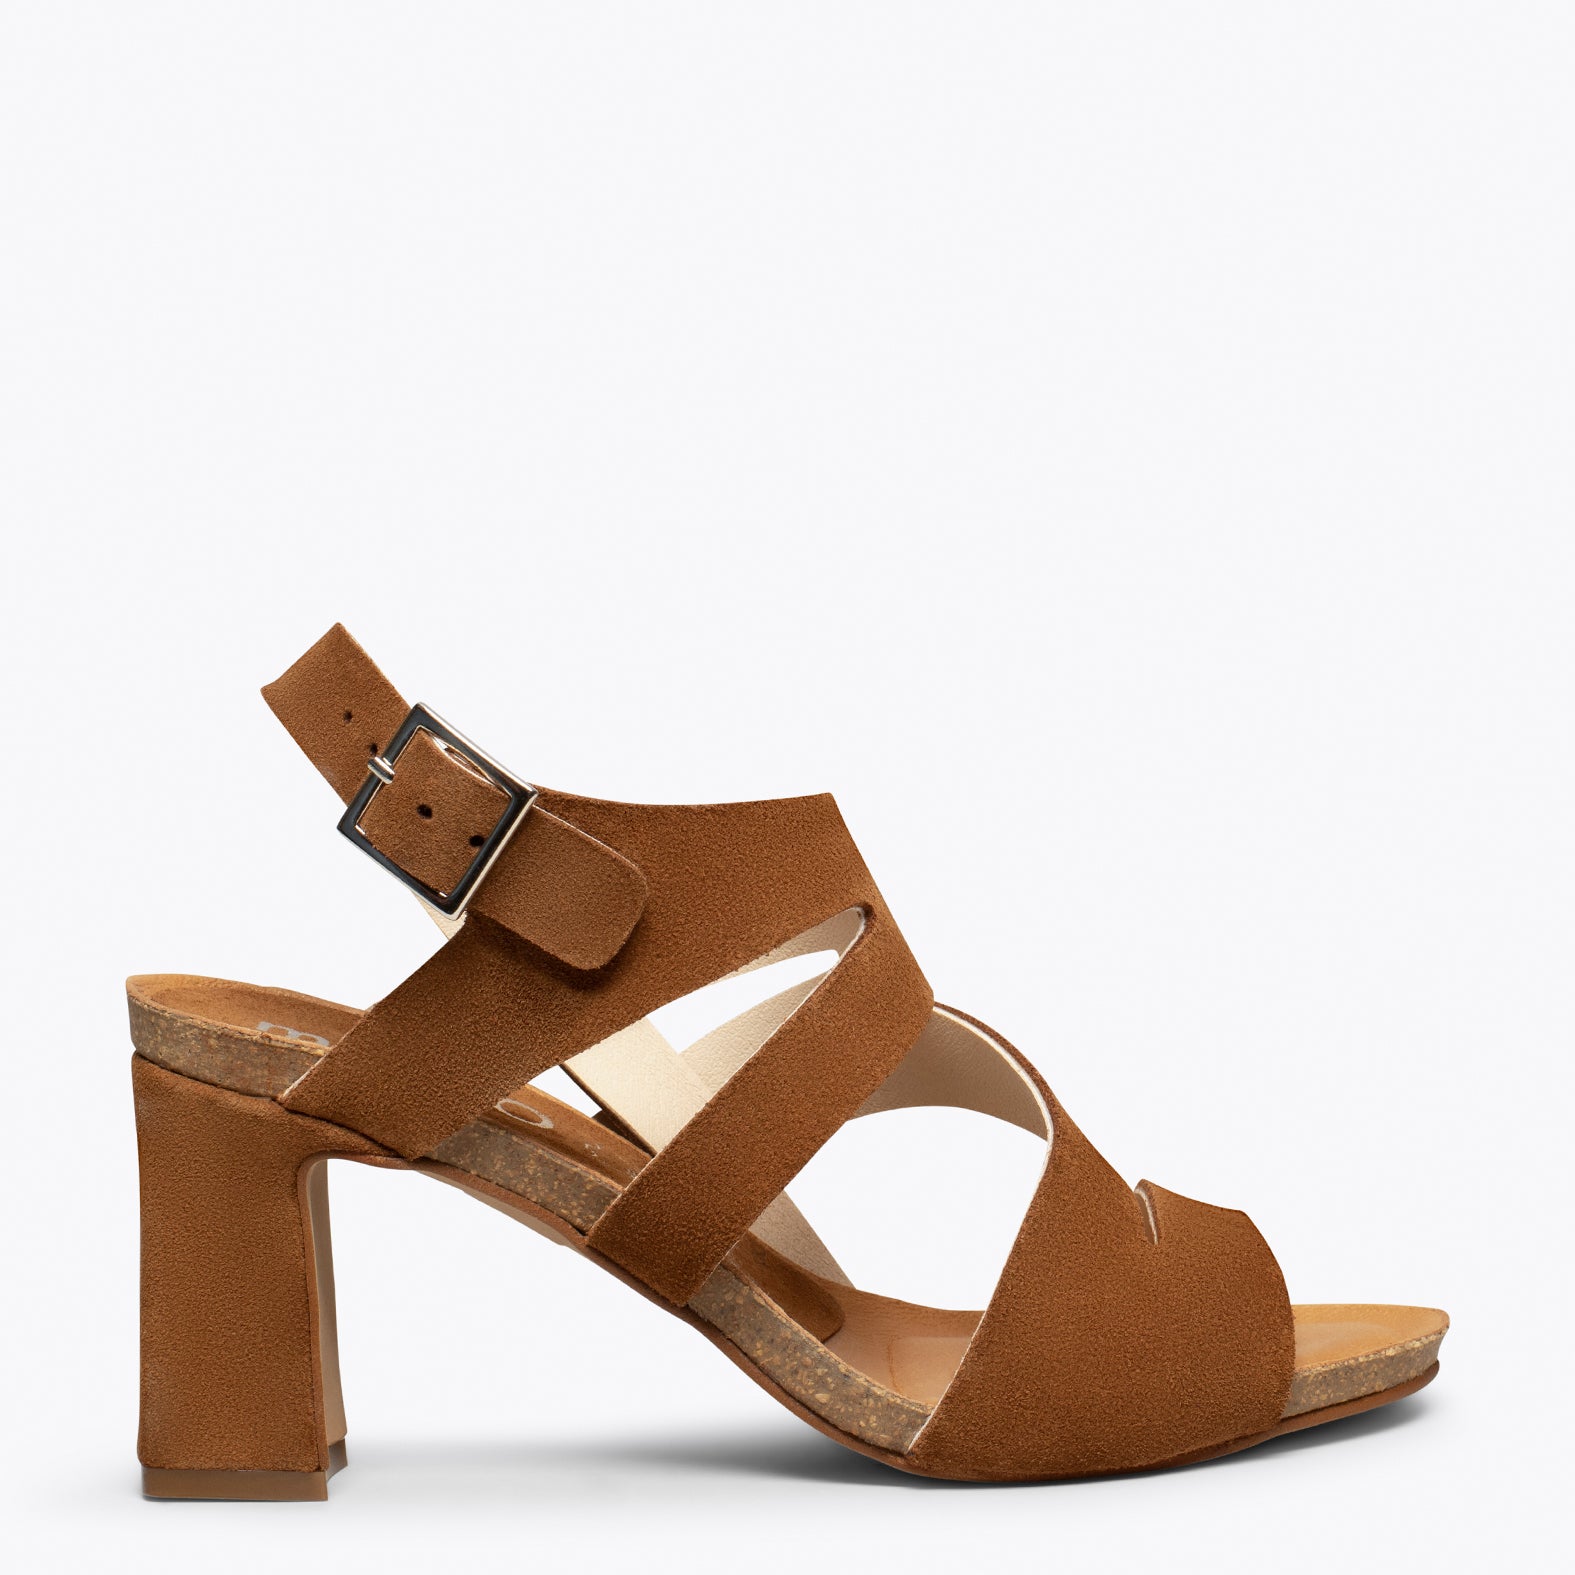 STYLE – BROWN heel sandal with BIO technology